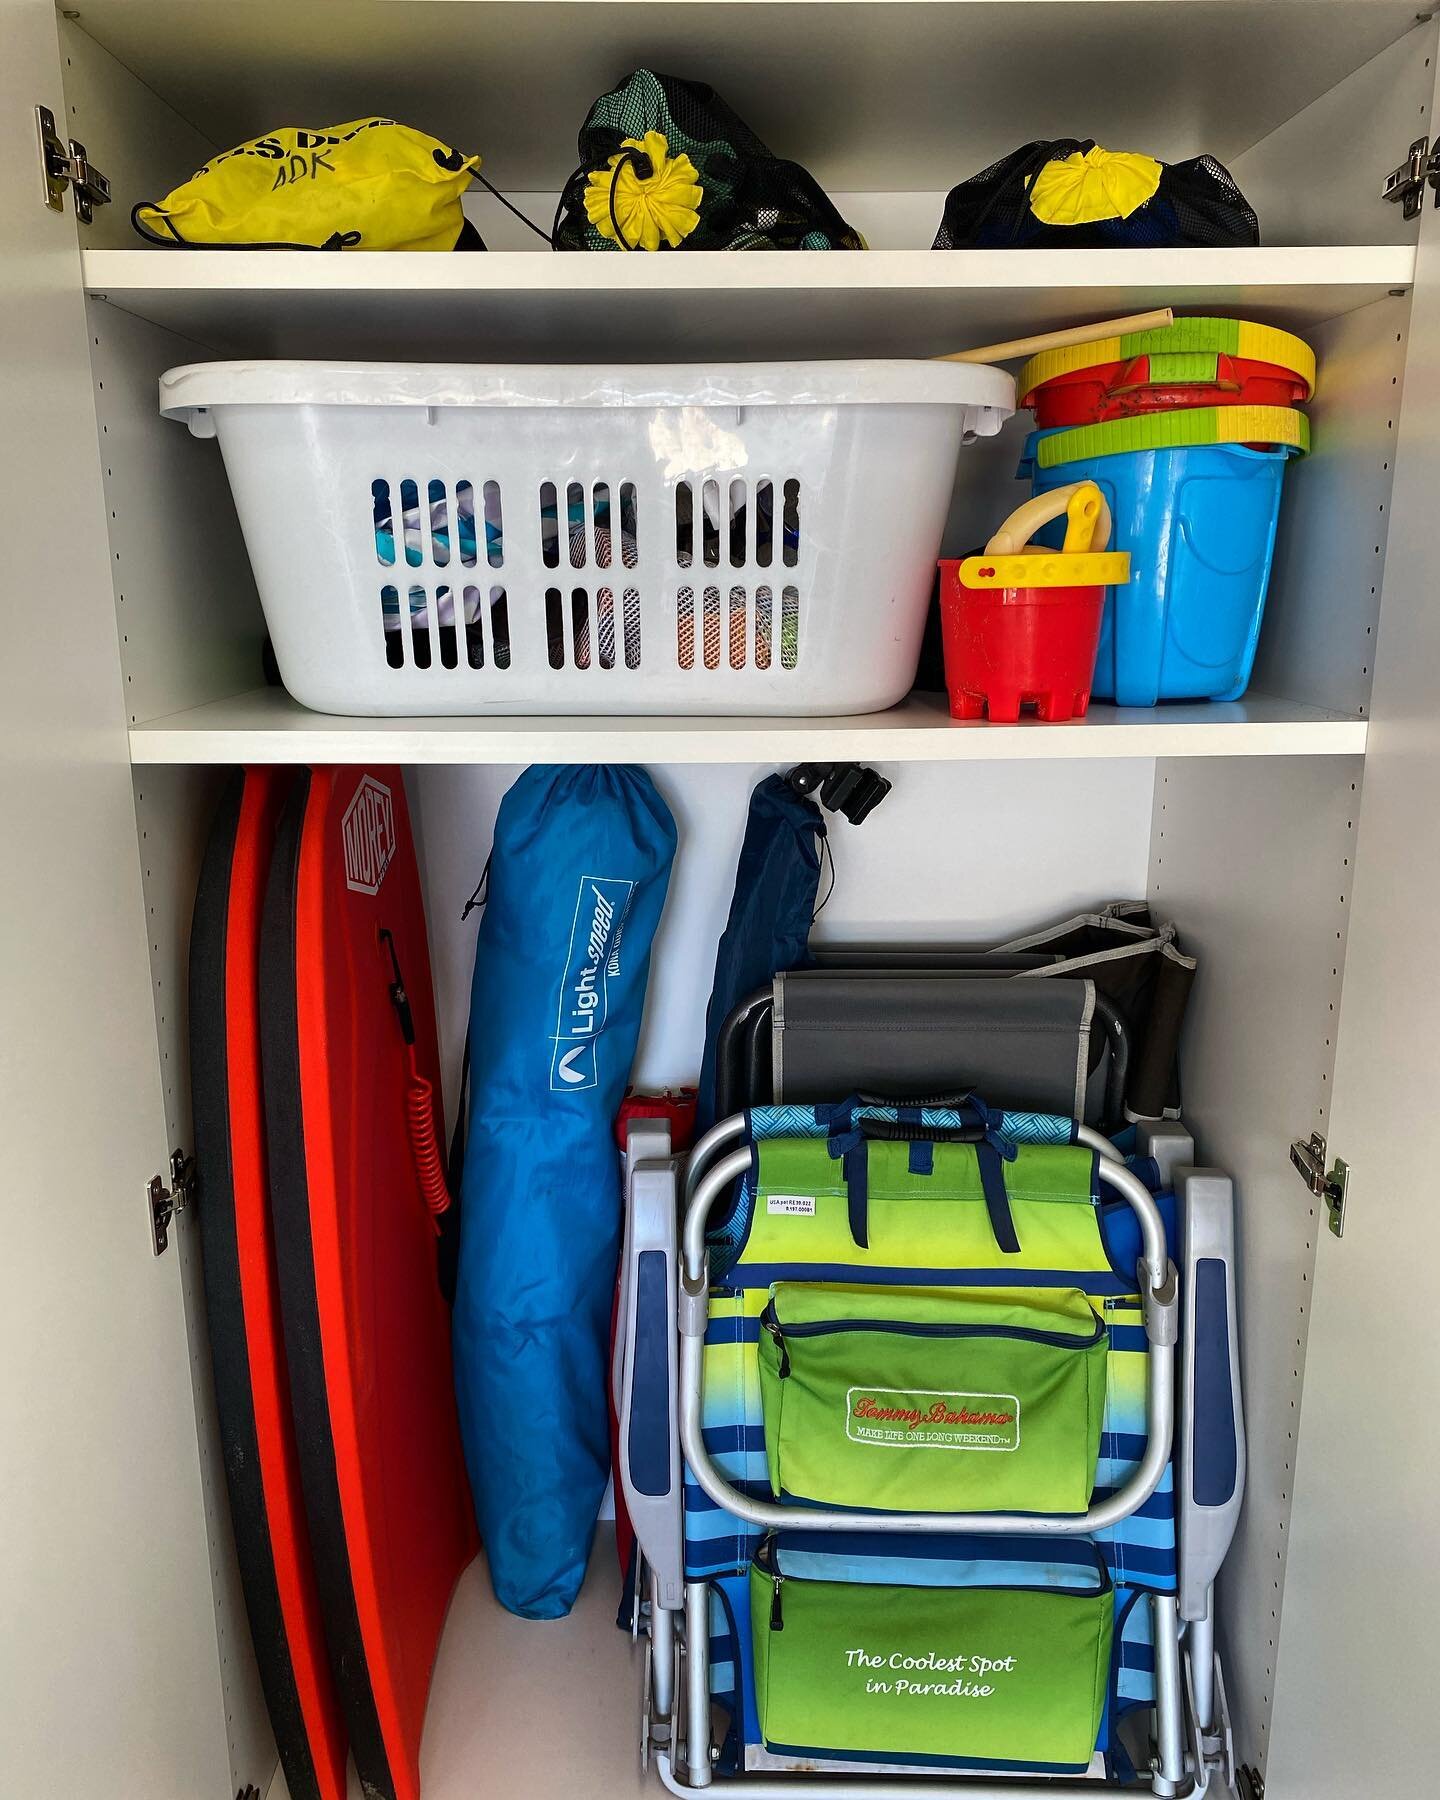 Who is ready for summer?! 🙋🏻&zwj;♀️ 

The real question is, is your house ready for summer? We&rsquo;ve got beach stations all sorted. Give us a call!
#summervibes #beachtown #surfshed #beachhouse #organized